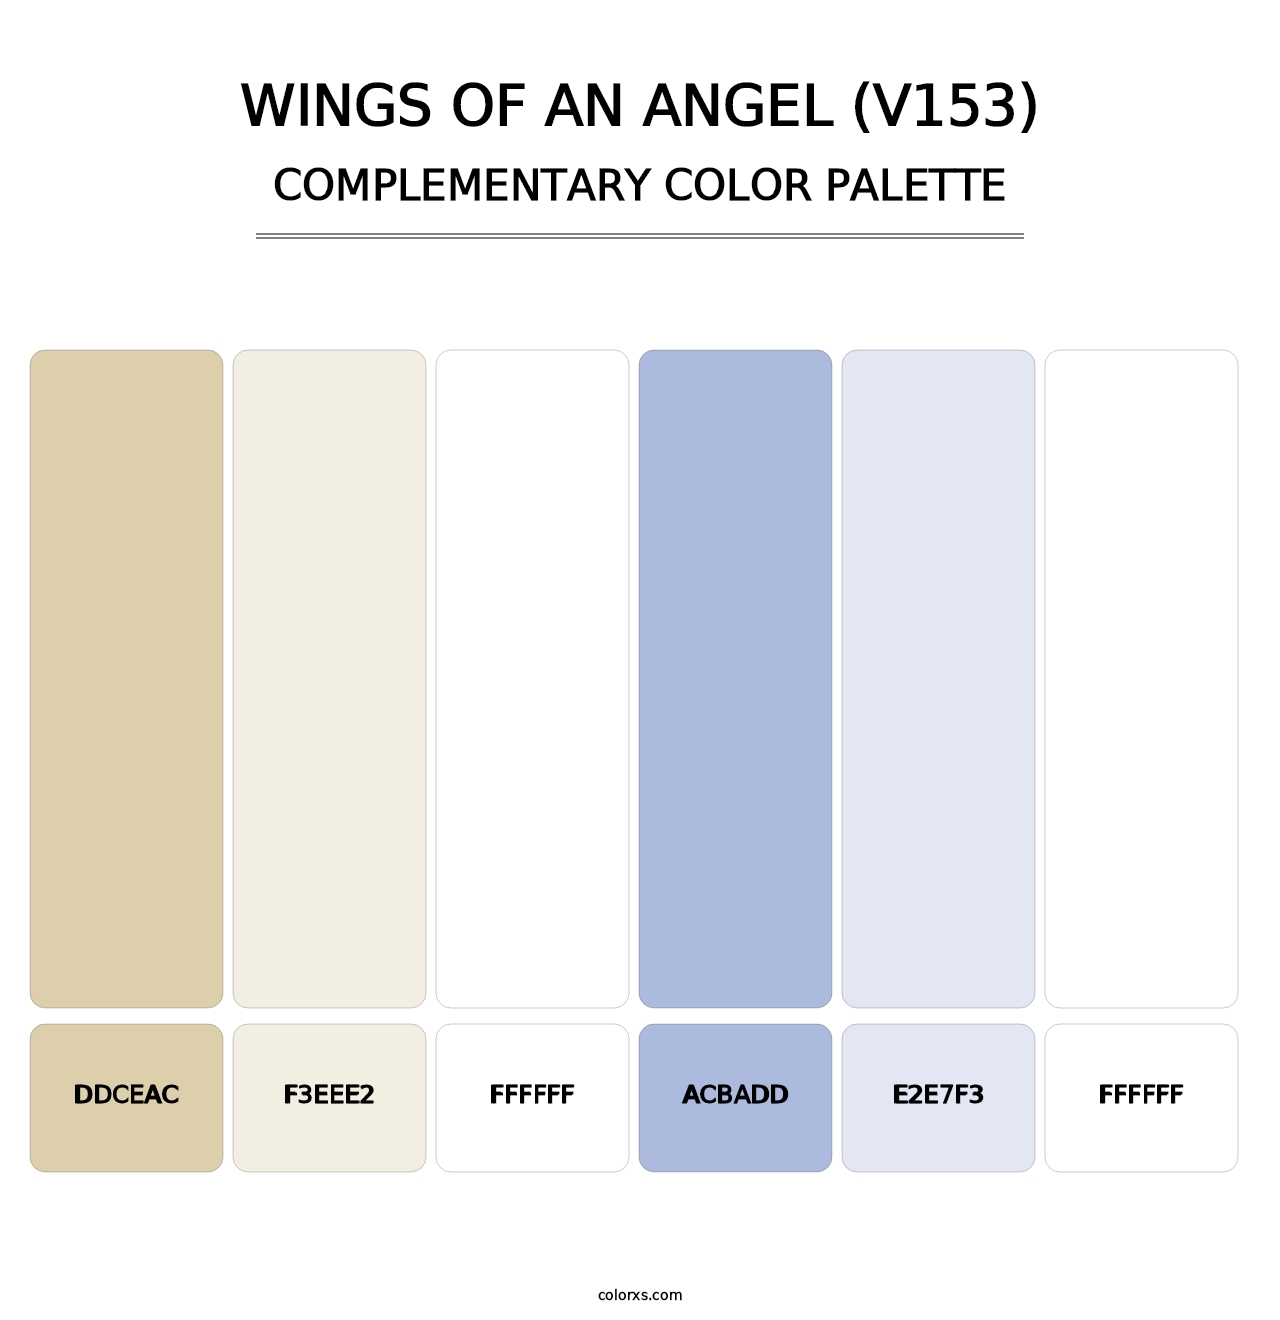 Wings of an Angel (V153) - Complementary Color Palette